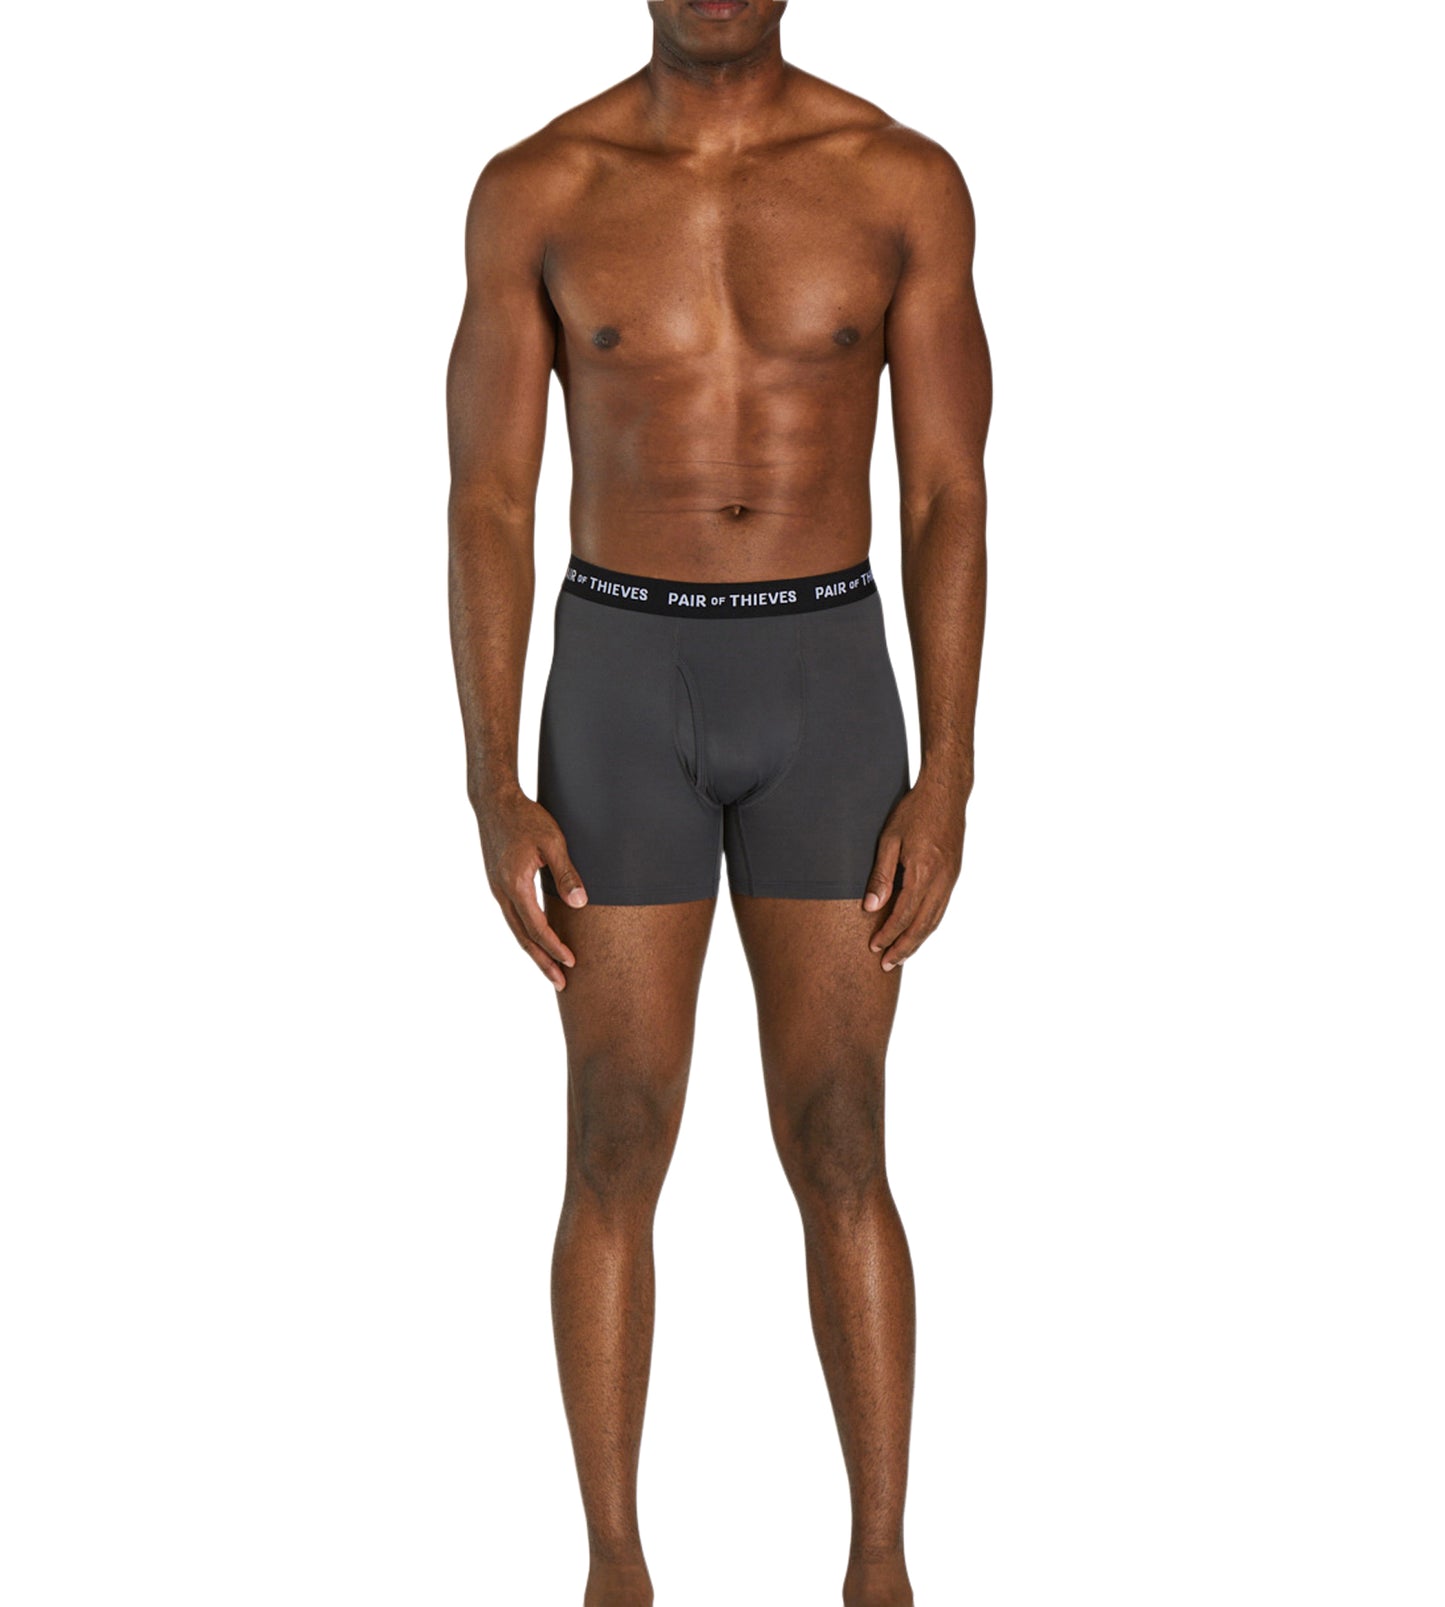 PAIR OF THIEVES Gone Rogue SuperFit Boxer Briefs - 2-Pack - Save 48%